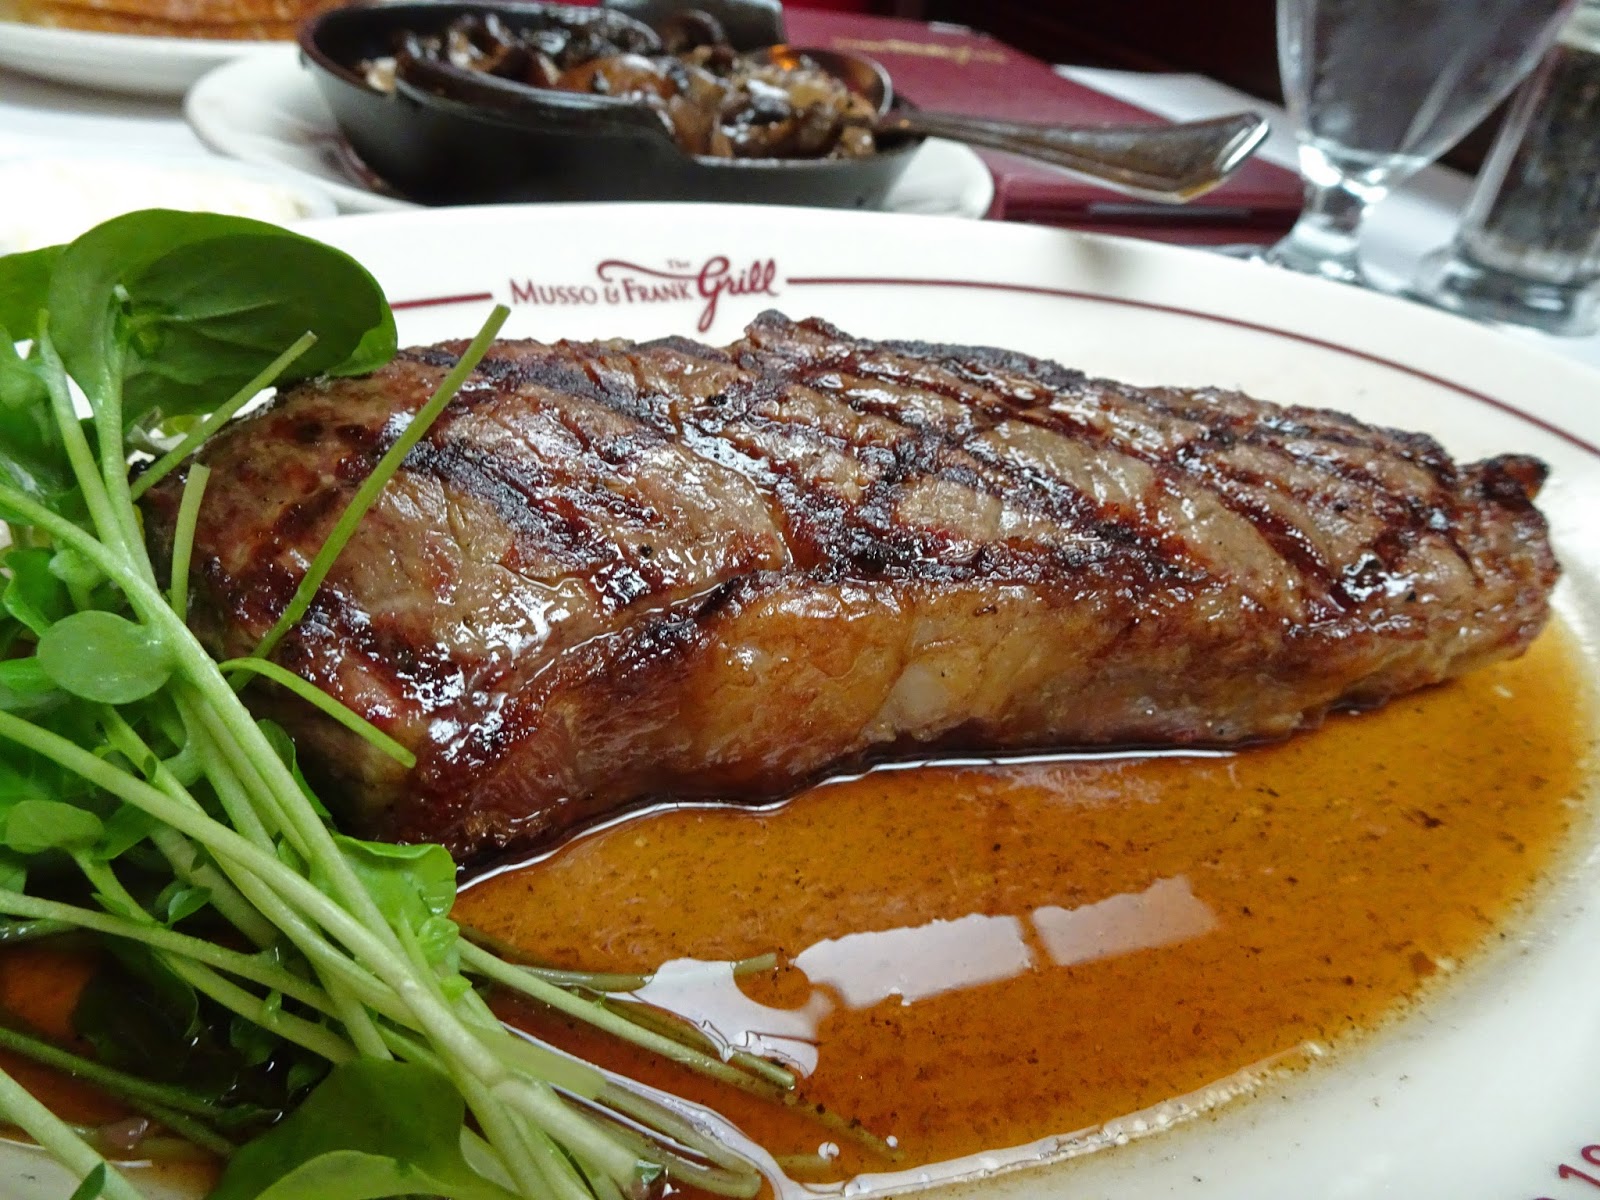 MEAT GENIUS: MUSSO & FRANK GRILL